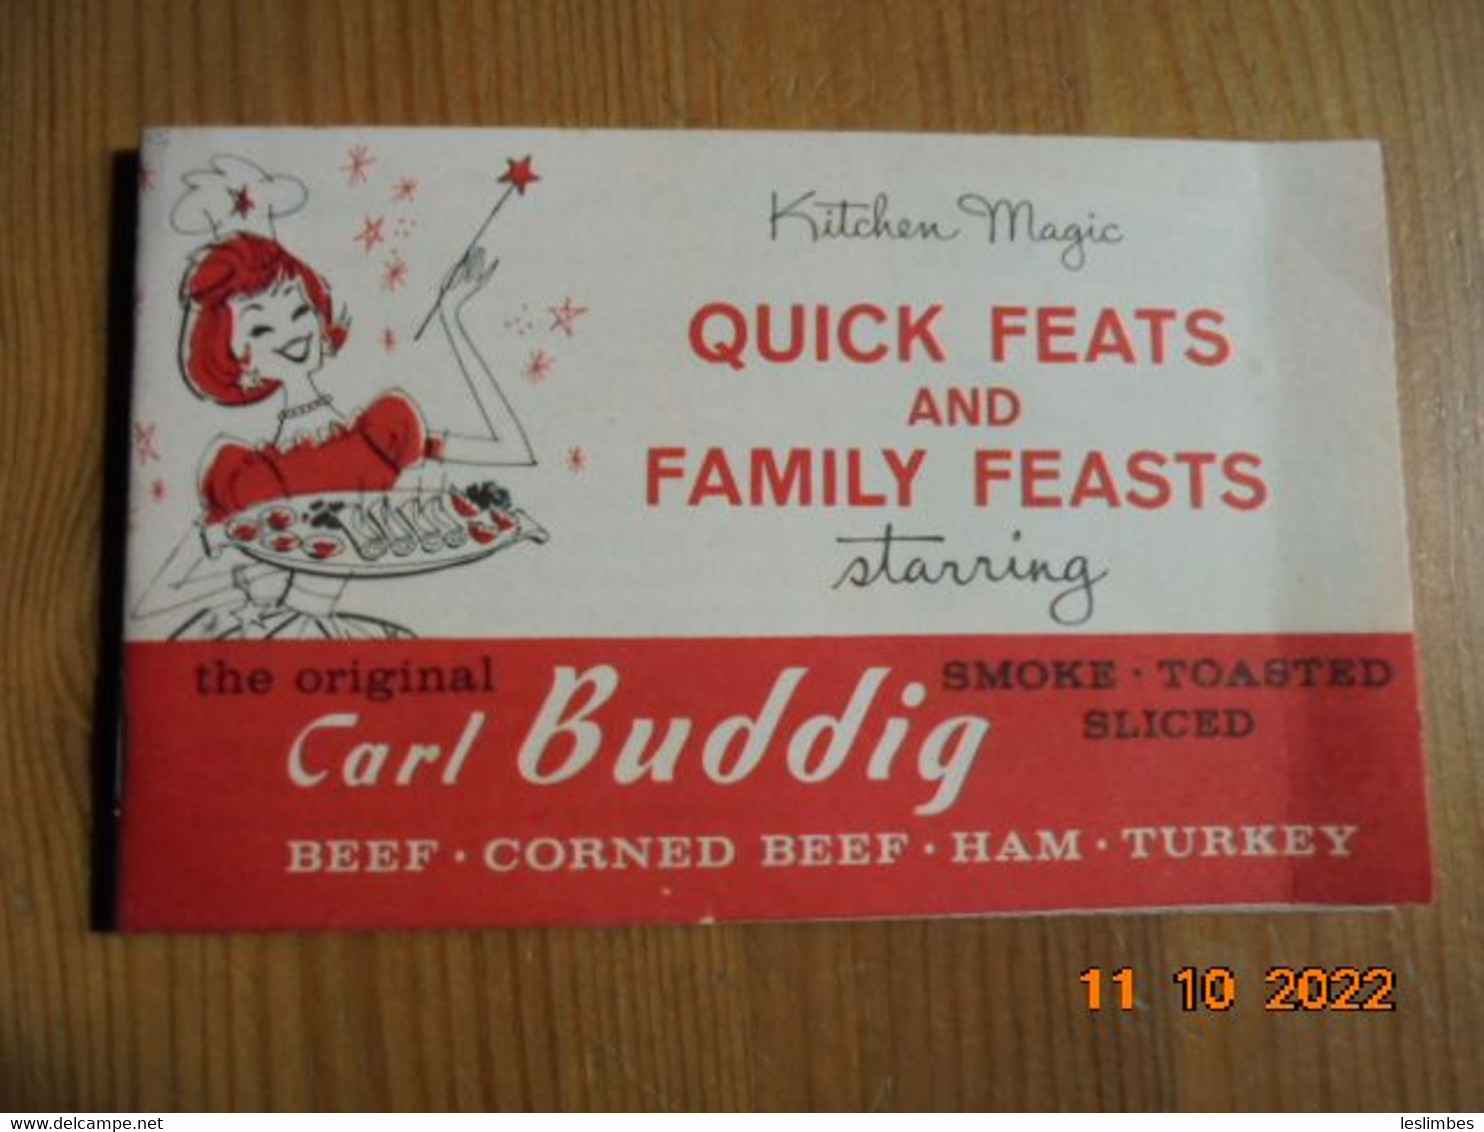 Kitchen Magic Quick Feats And Family Feasts Starring The Original Carl Buddig Smoke Toasted Sliced Beef, Corned Beef.... - Americana